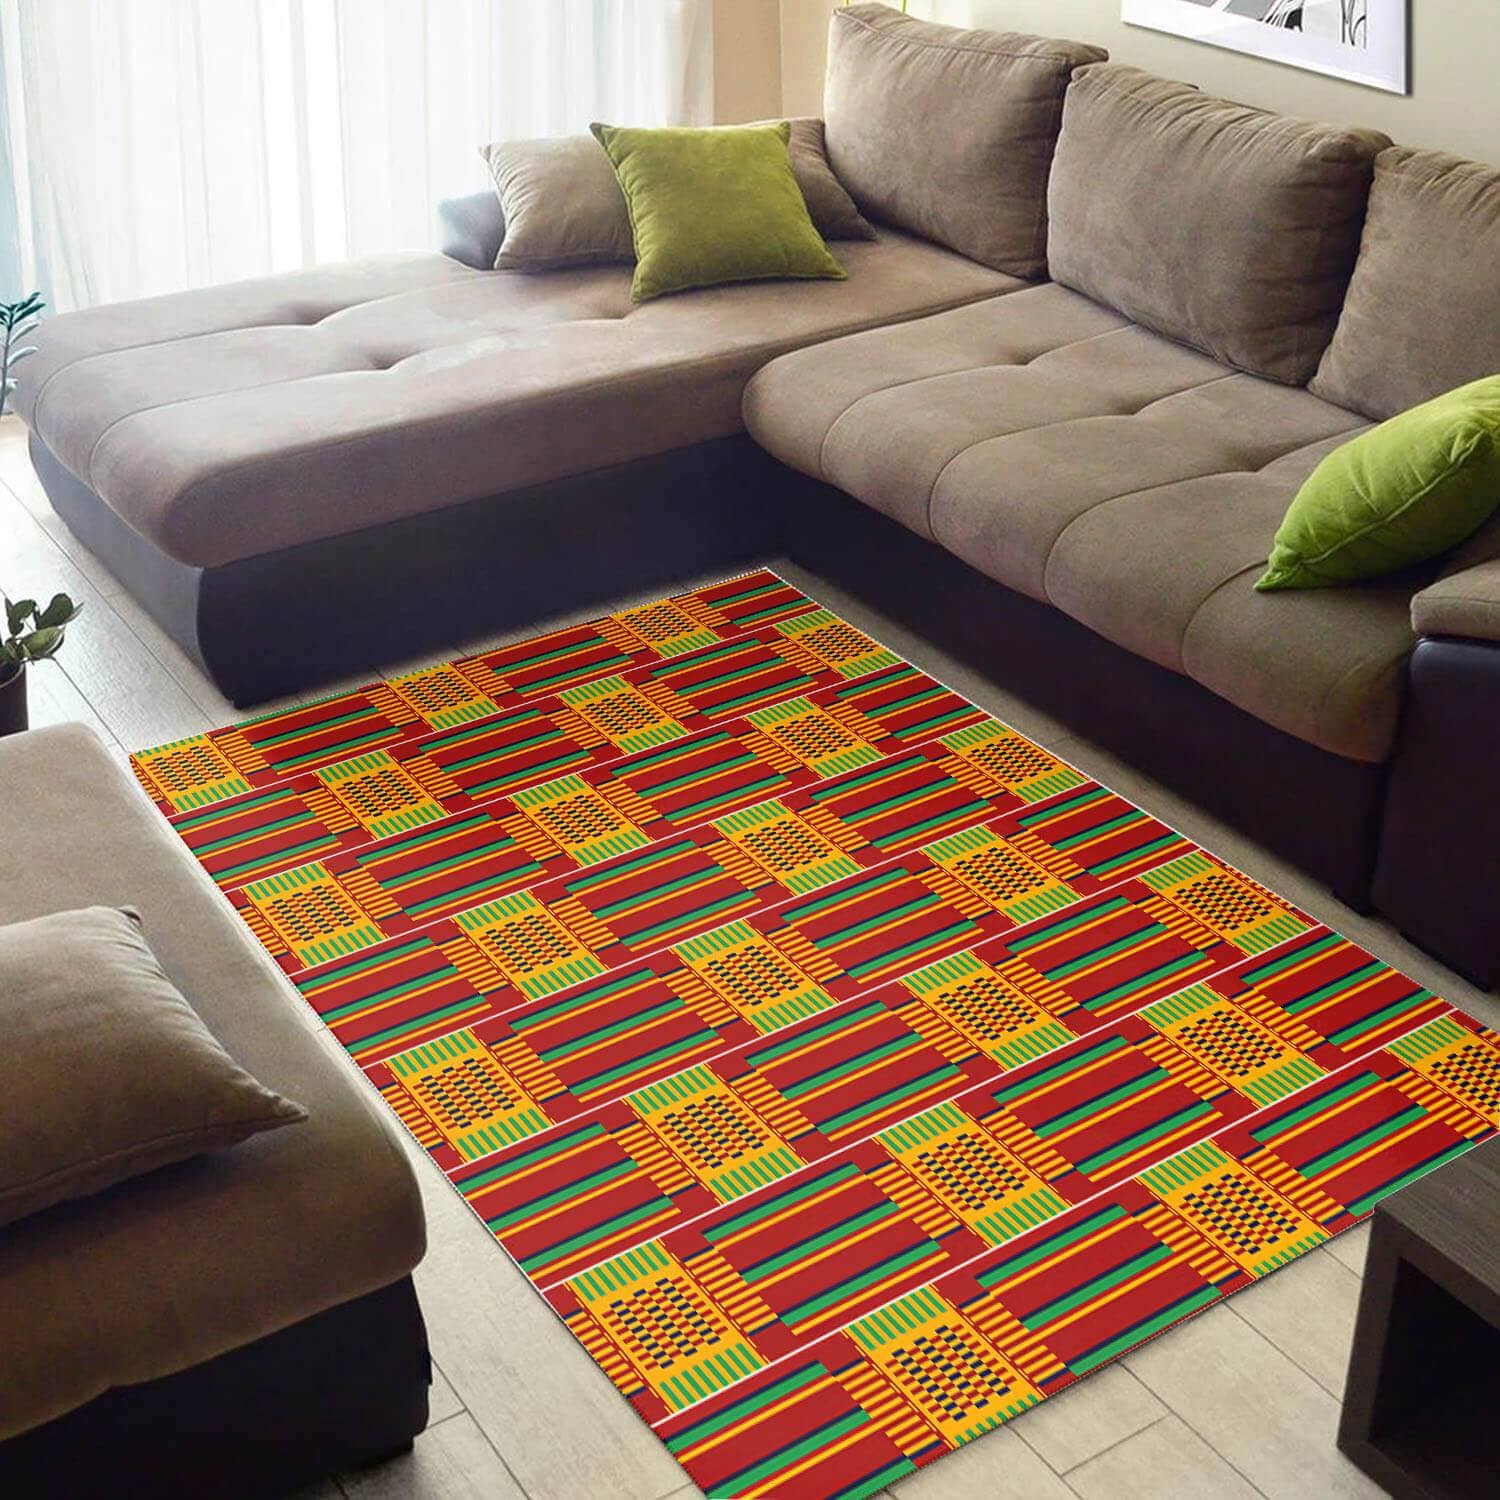 Trendy African Holiday Natural Hair Ethnic Seamless Pattern Carpet Themed Home Rug